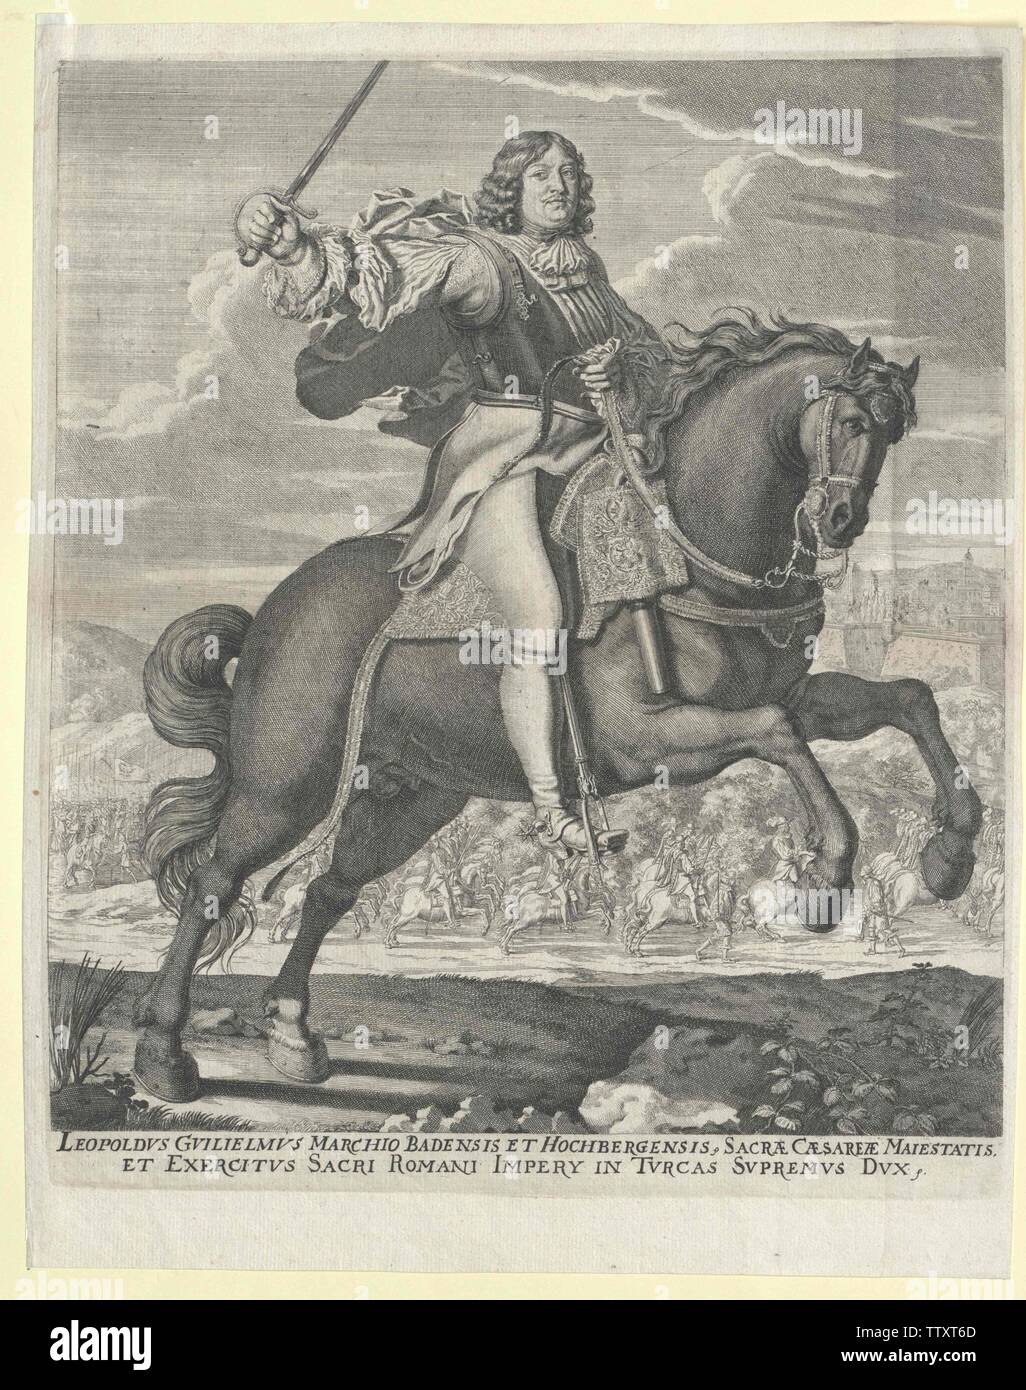 Leopold William I, margrave of Baden-Baden, Additional-Rights-Clearance-Info-Not-Available Stock Photo